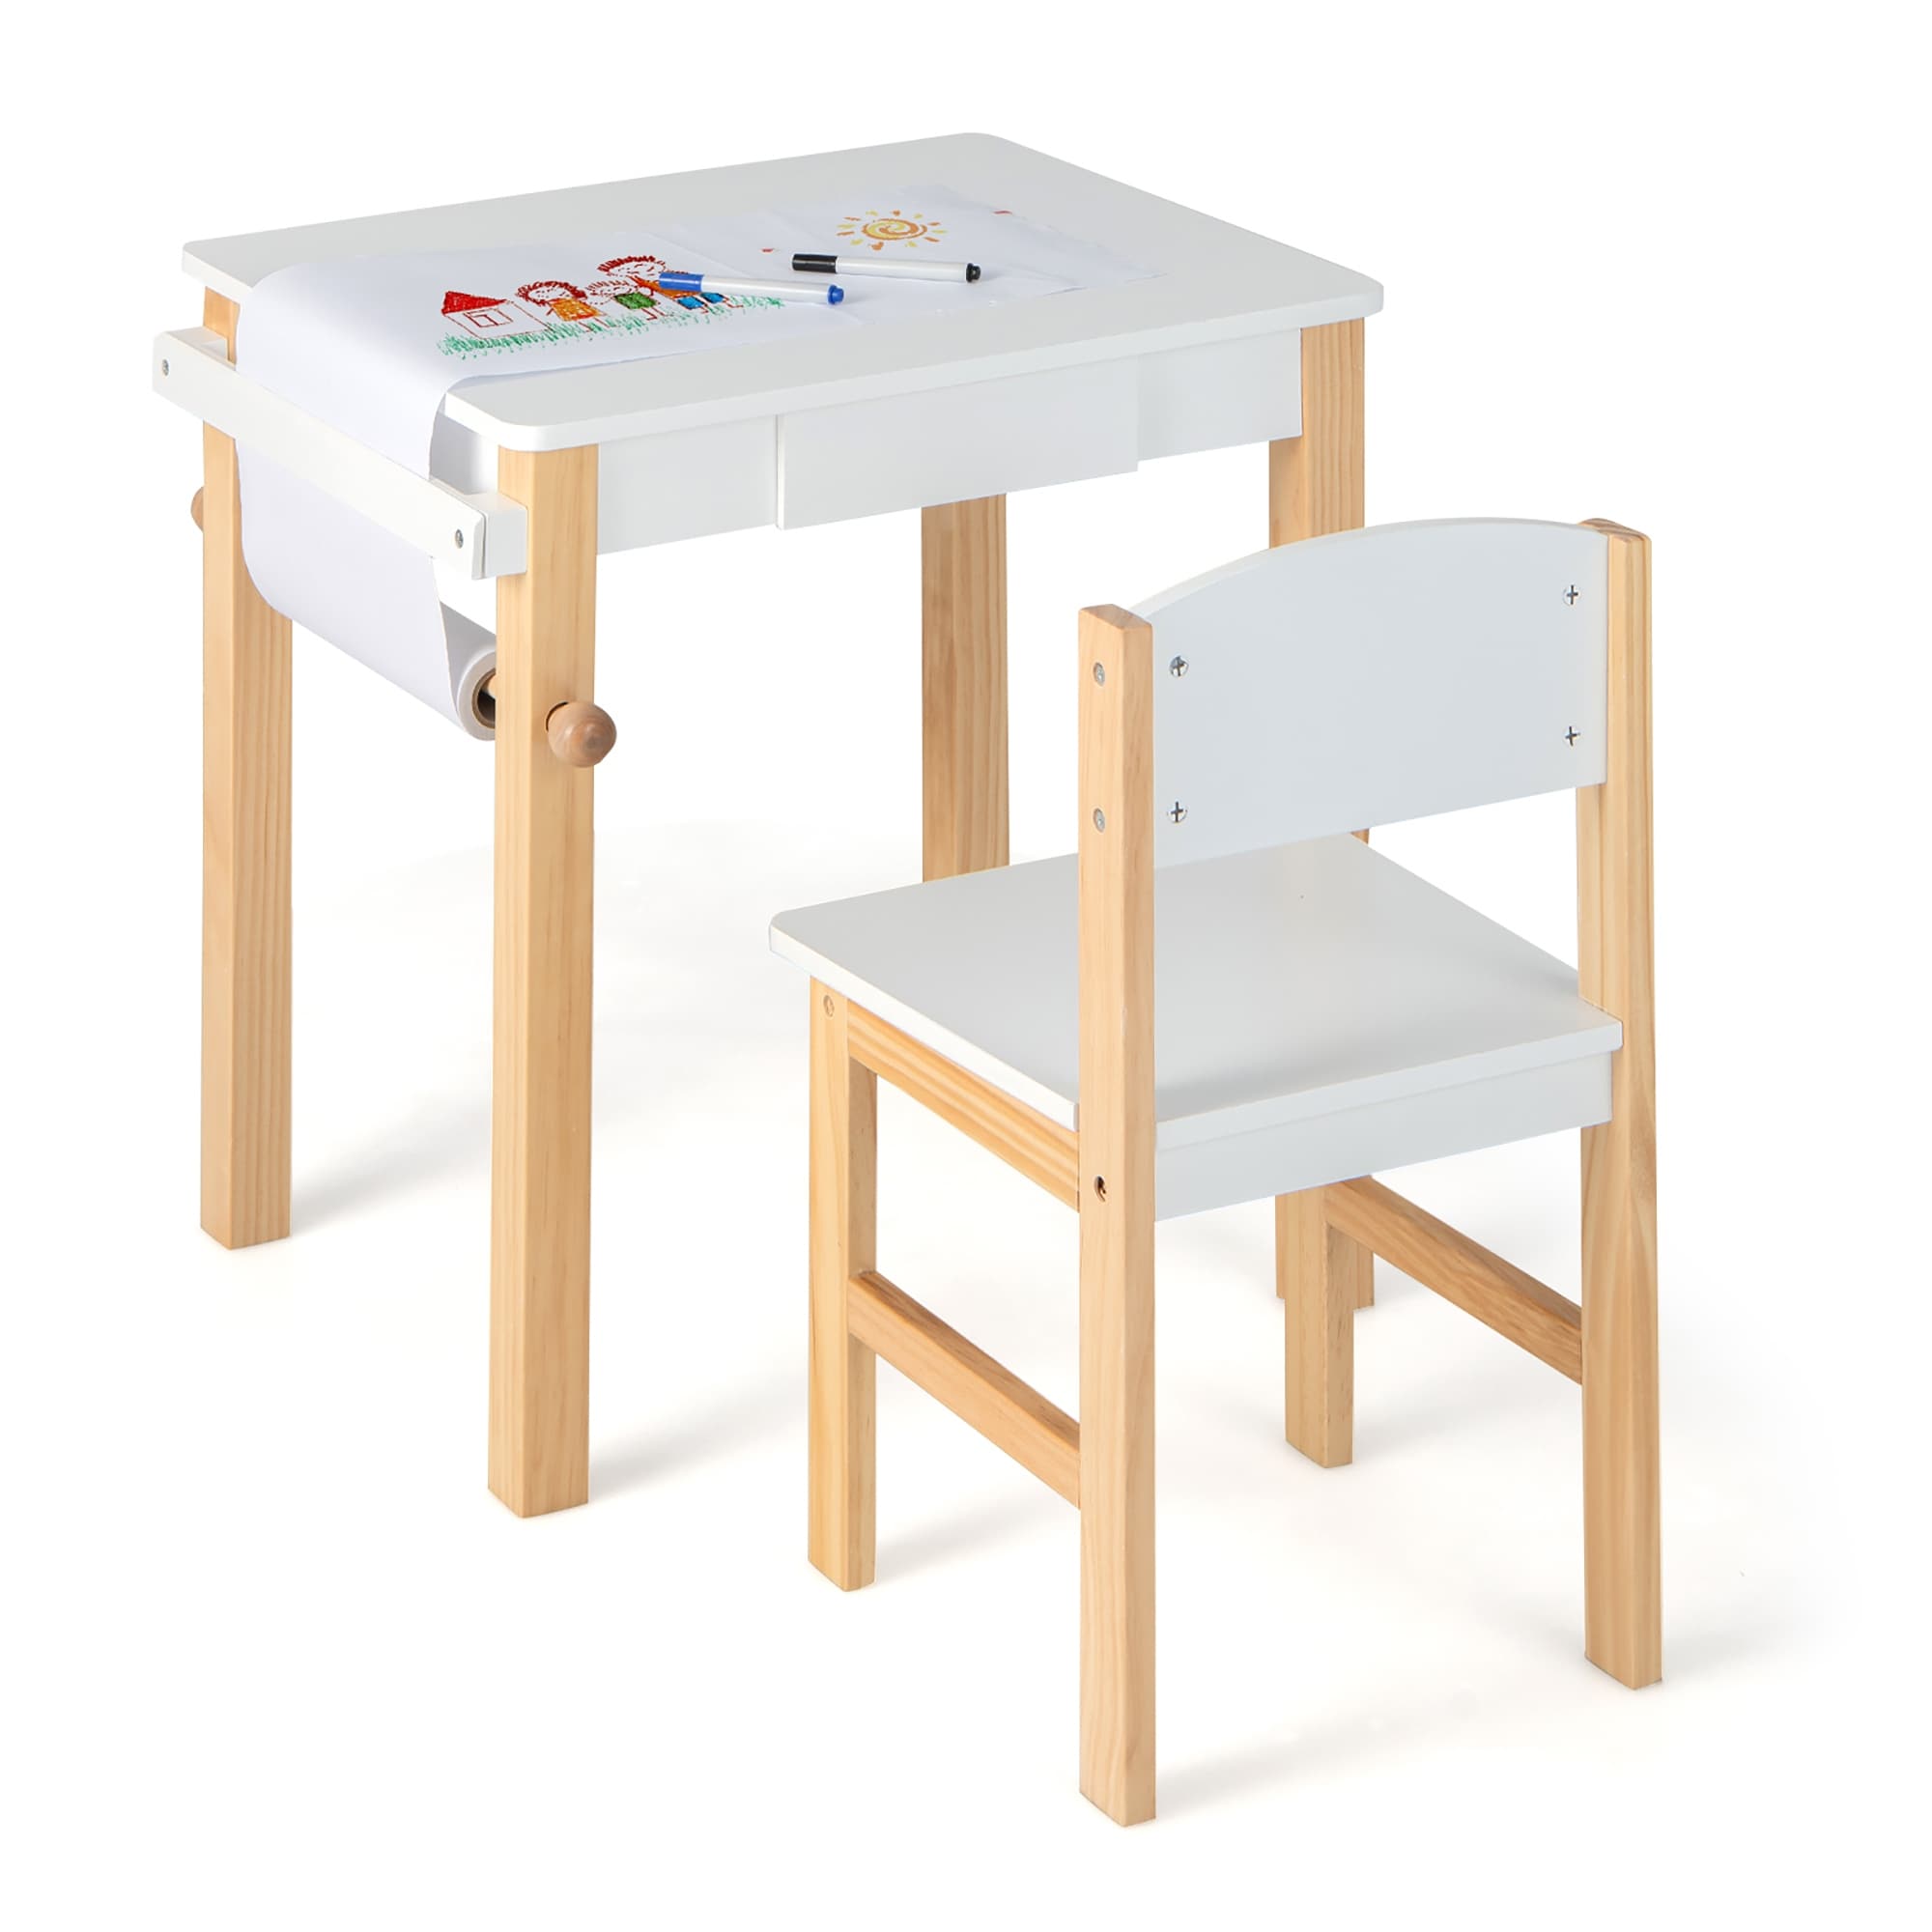 MARTHA STEWART Living and Learning Kids' Art Table and Stool Set (Gray) -  Wooden Drawing and Painting Desk with Paper Roller, Paint Cups and  Removable